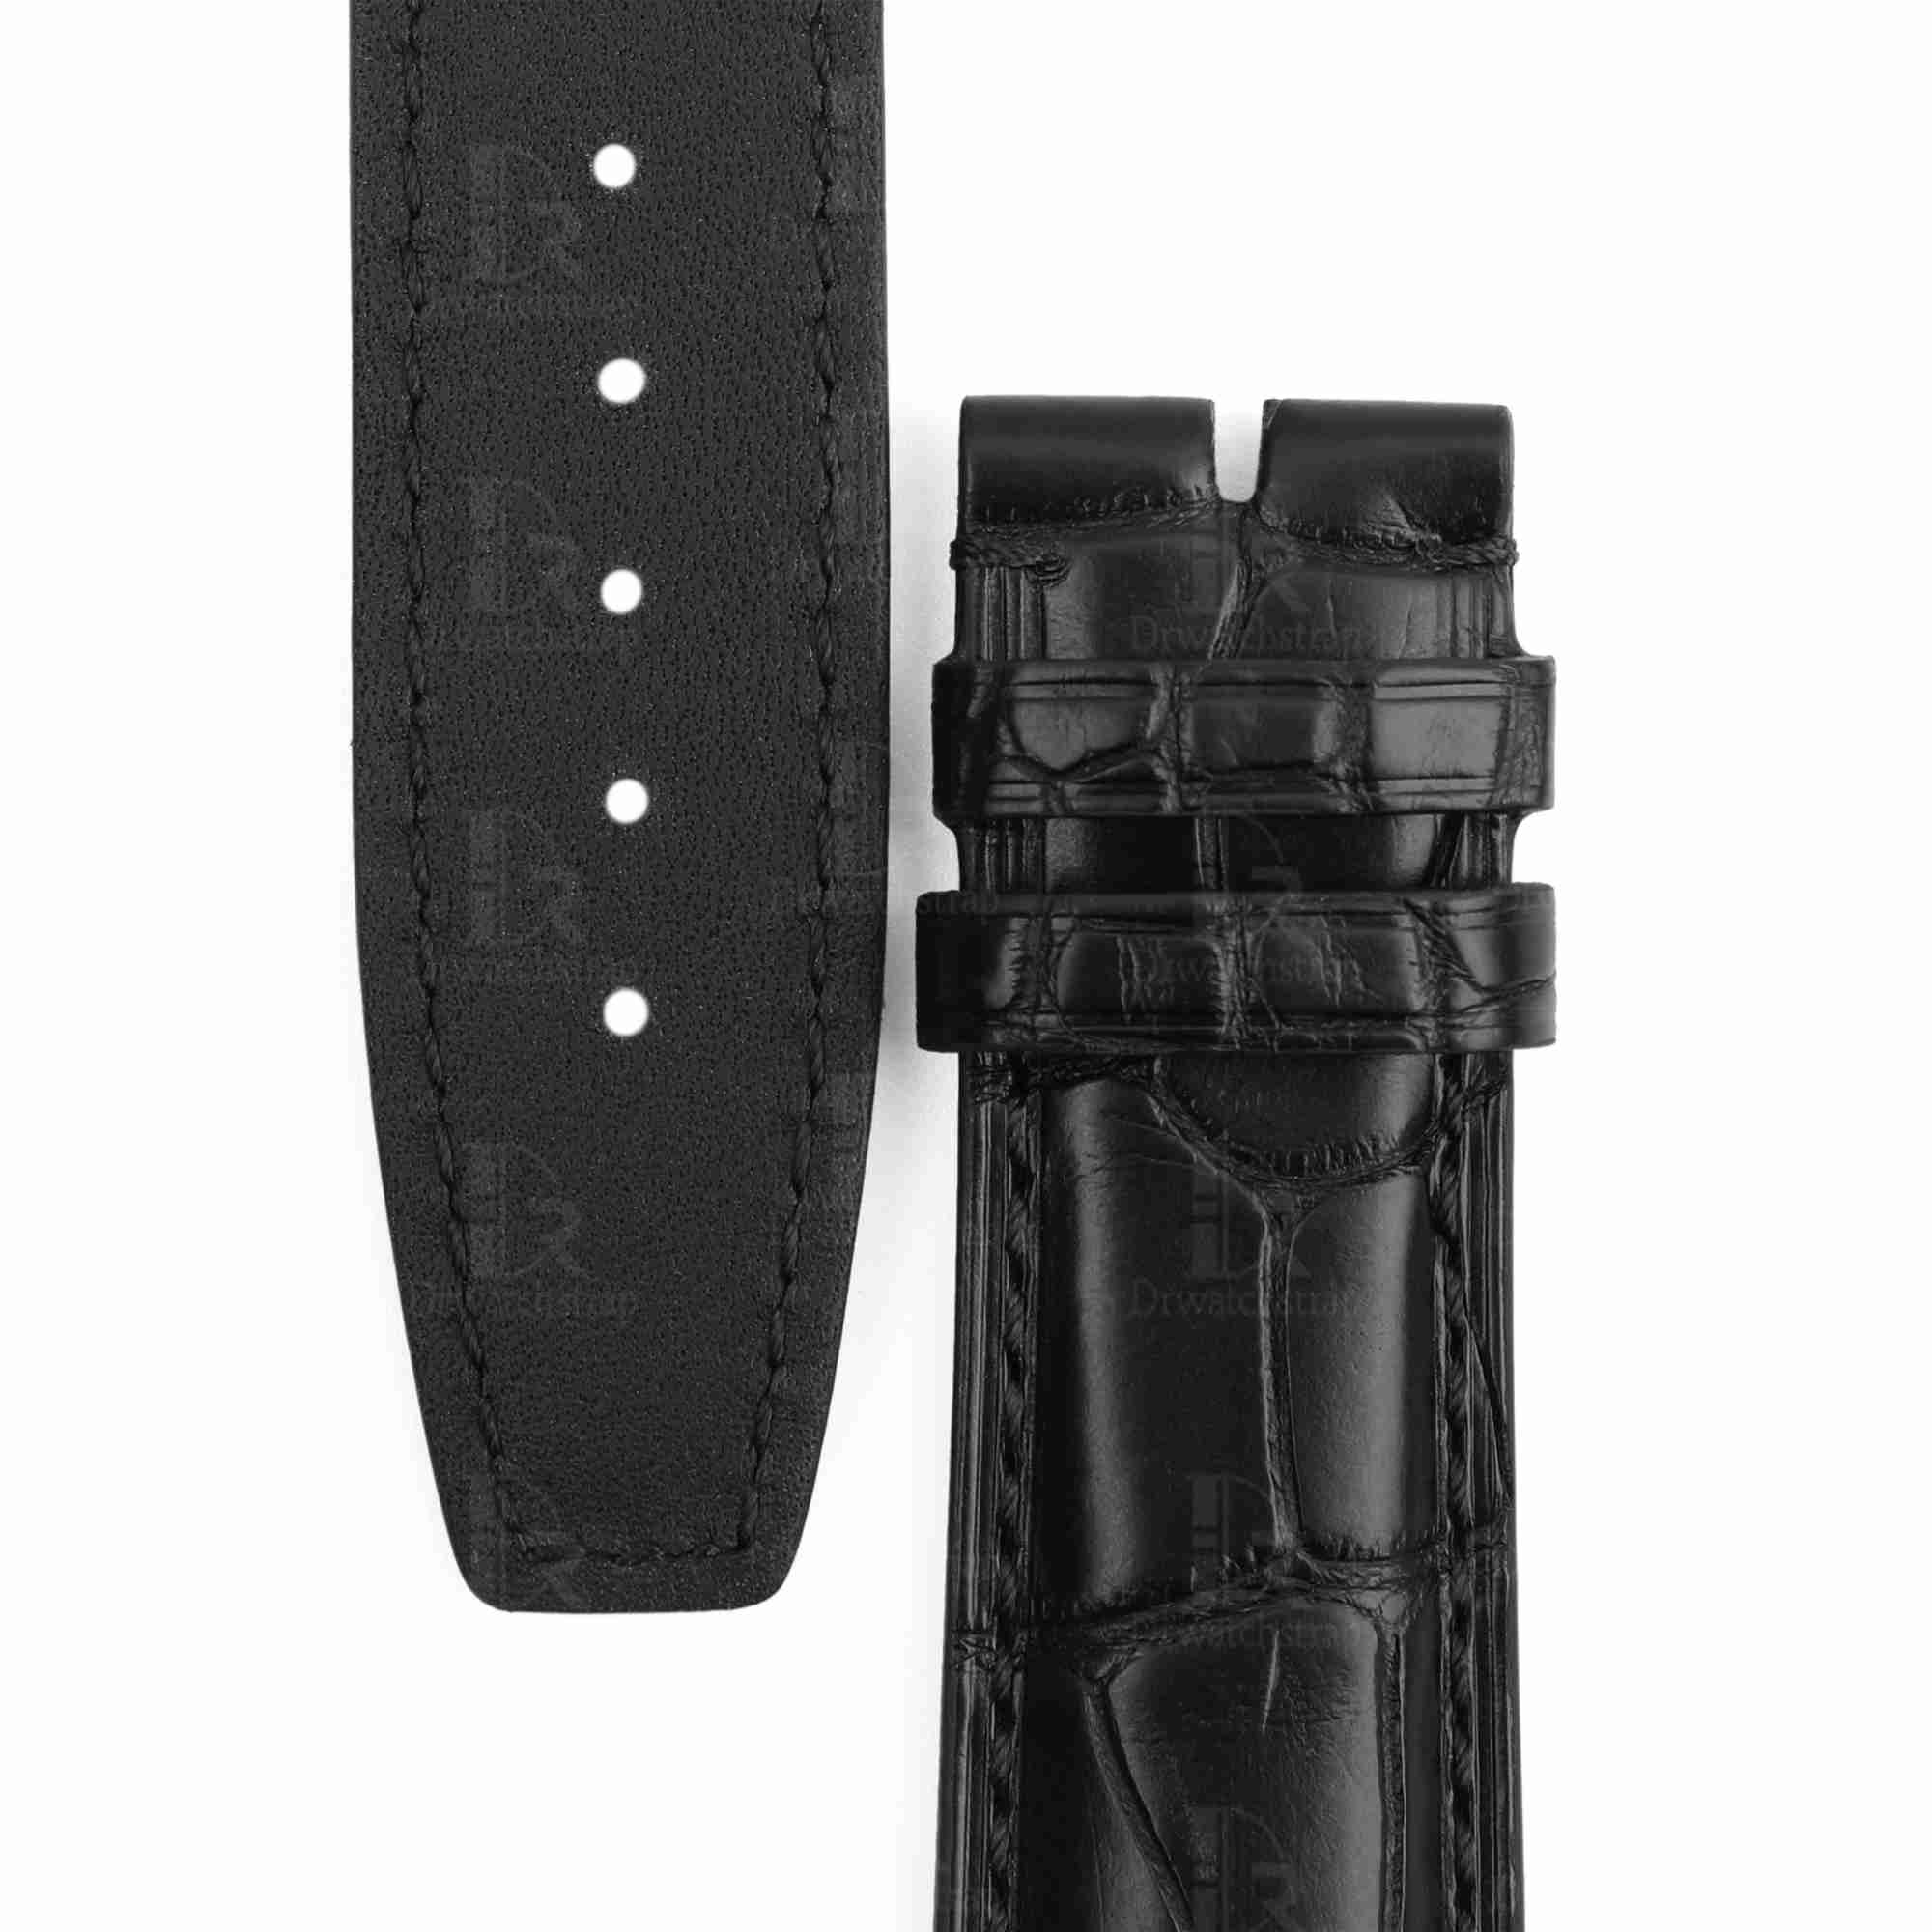 Genuine best quality alligator black IWC leather watch straps replacement watchbands for IWC Portofino / Portuguese Chronograph watches online for sale at a low price - Shop the high-end quality watch bands from dr watchstrap